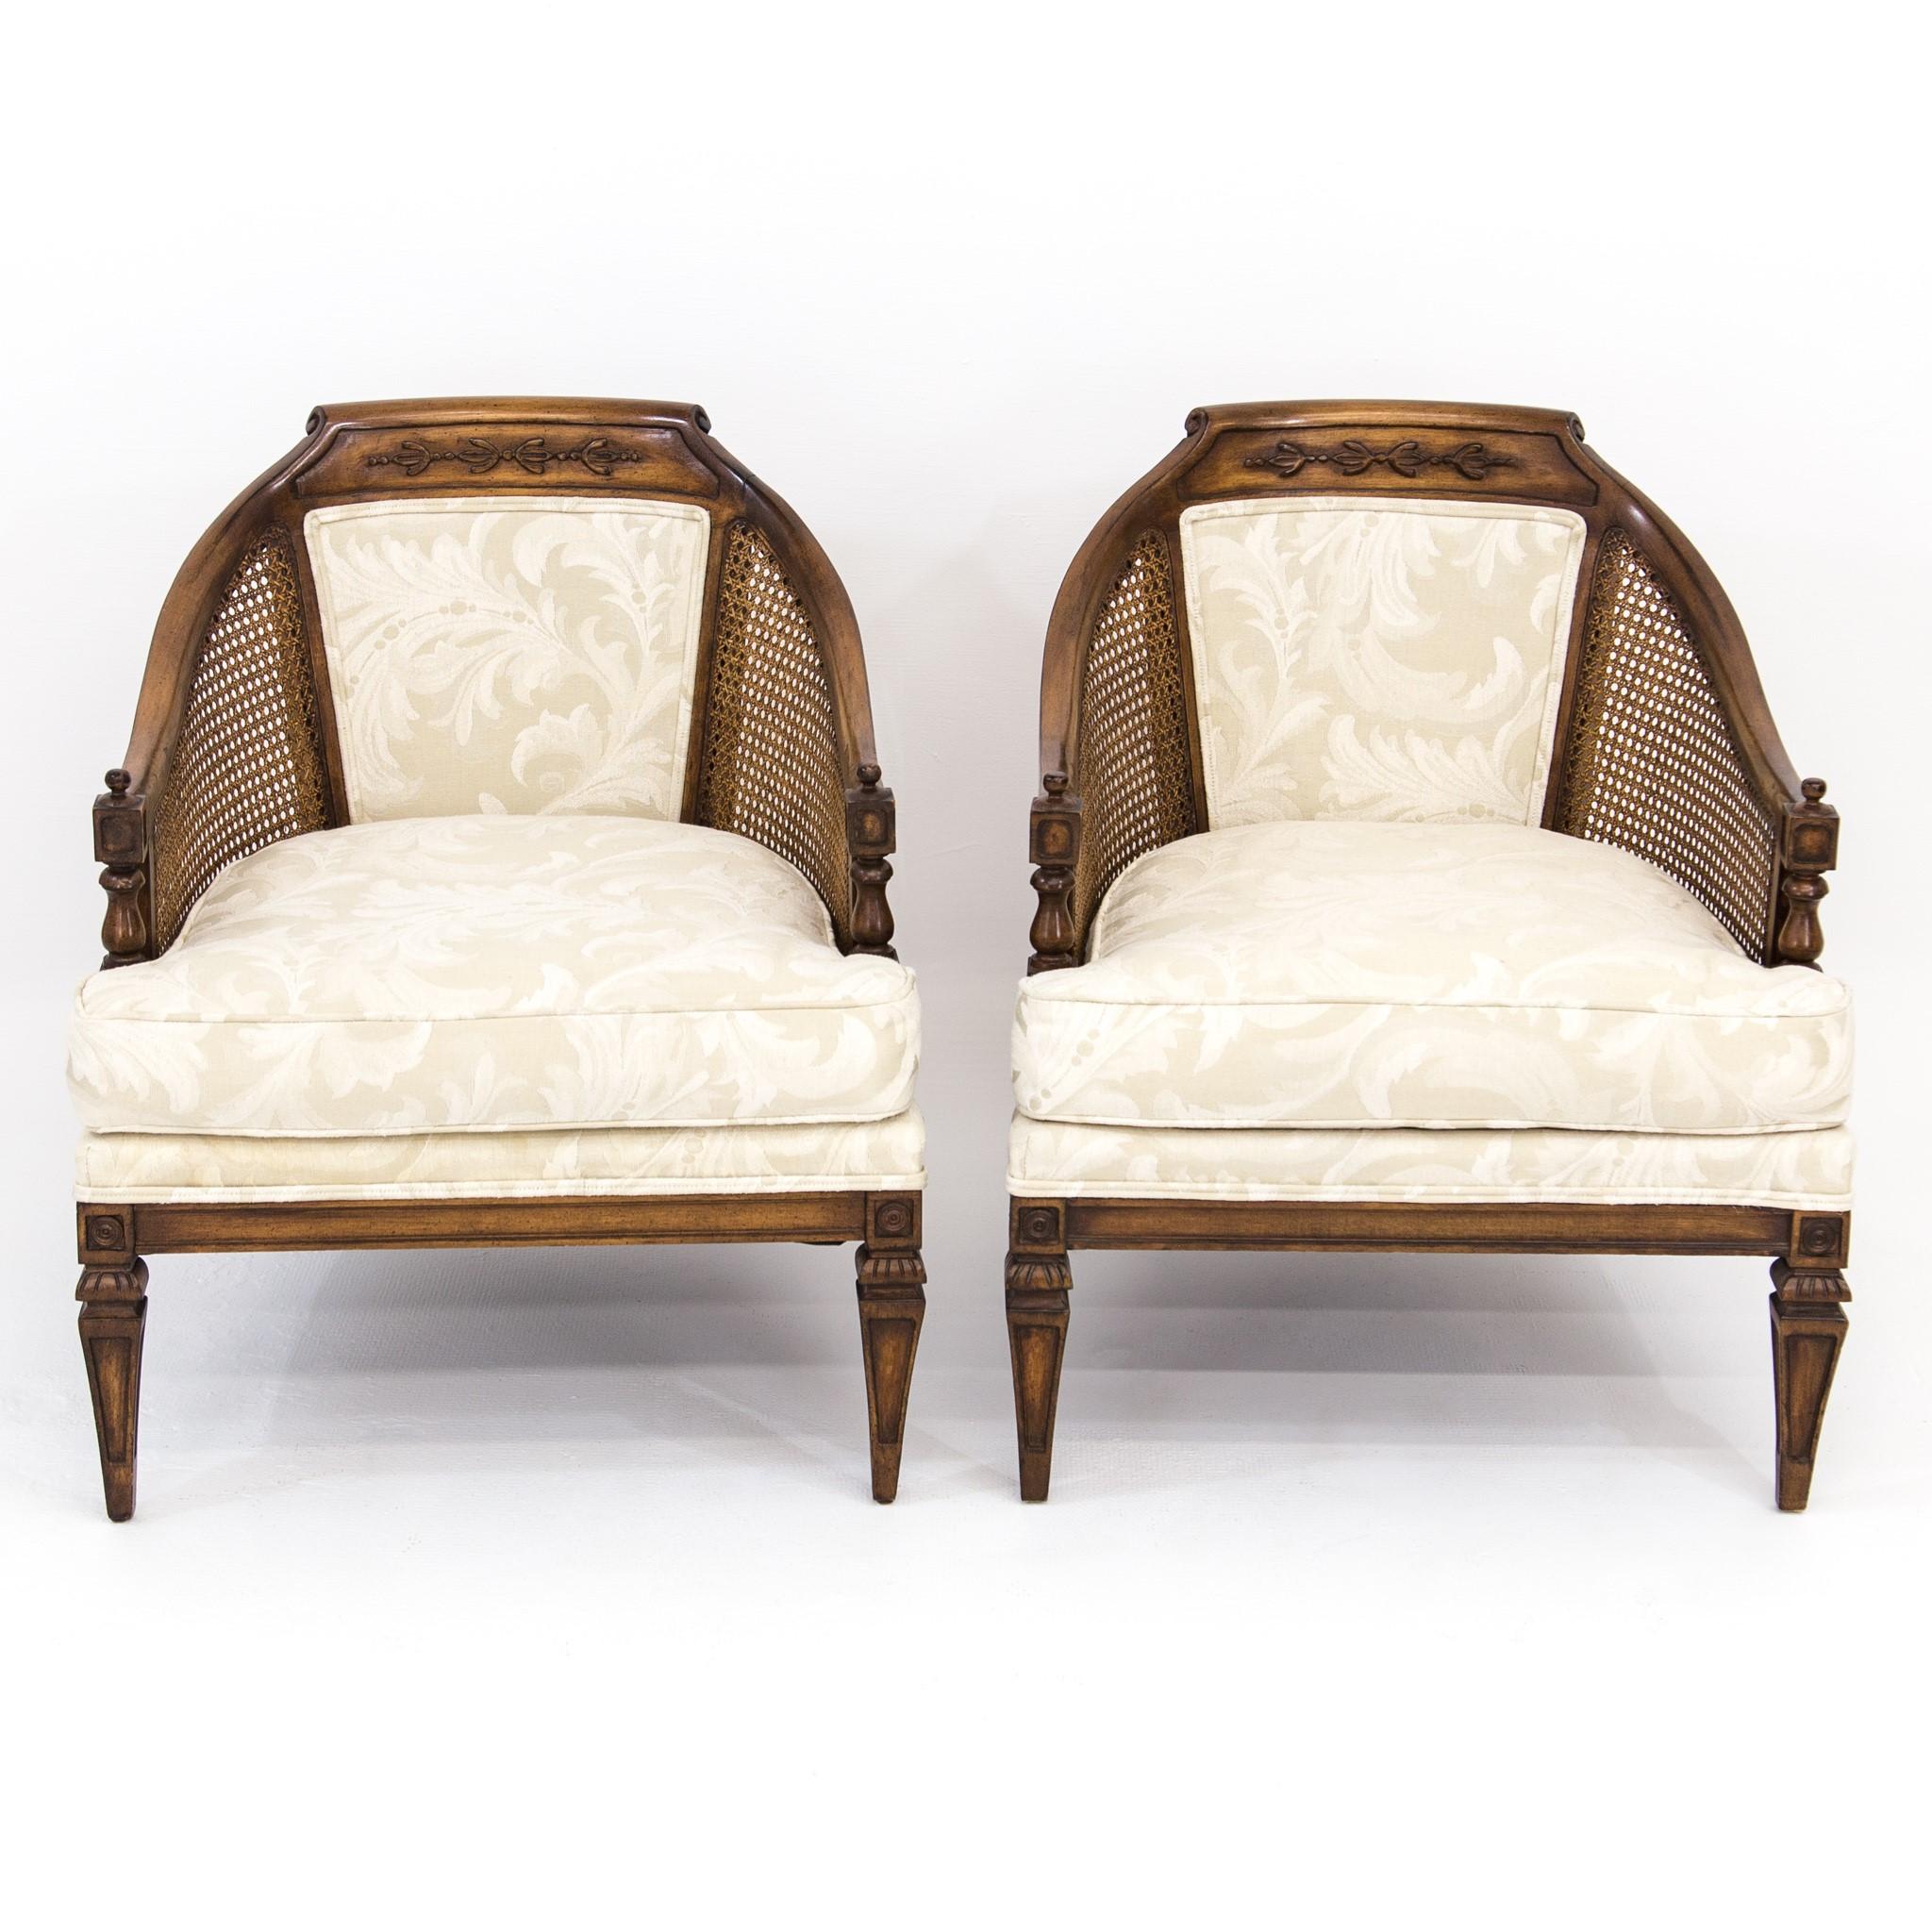 20th Century Pair of Mid-Century Walnut & Cane Barrel Back Club Chairs with White Upholstery